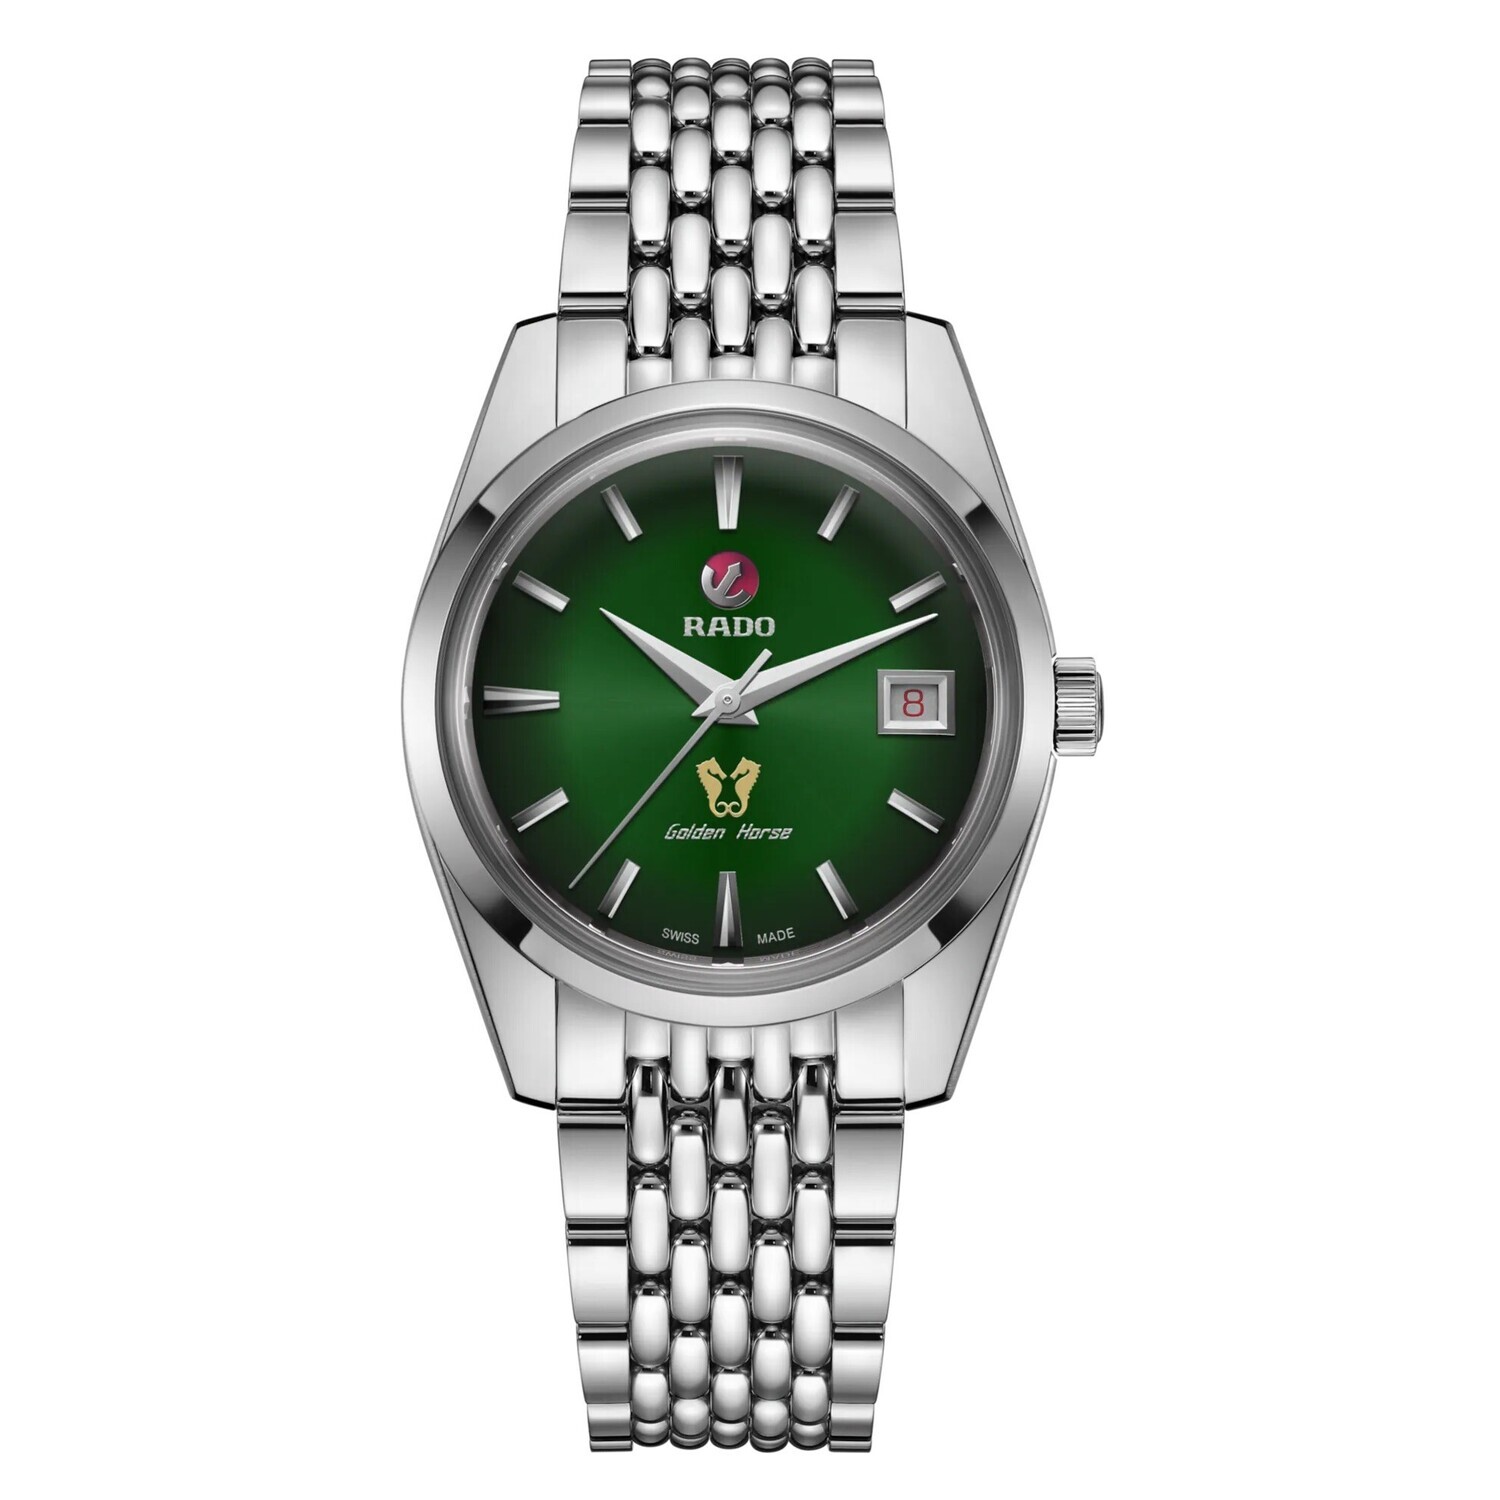 Rado Golden Horse R33930313 Automatic 37mm Limited Edition ST Steel Green Dial Unisex Sapphire glass anti-reflective Watch  for men and women 50m SWISS MADE